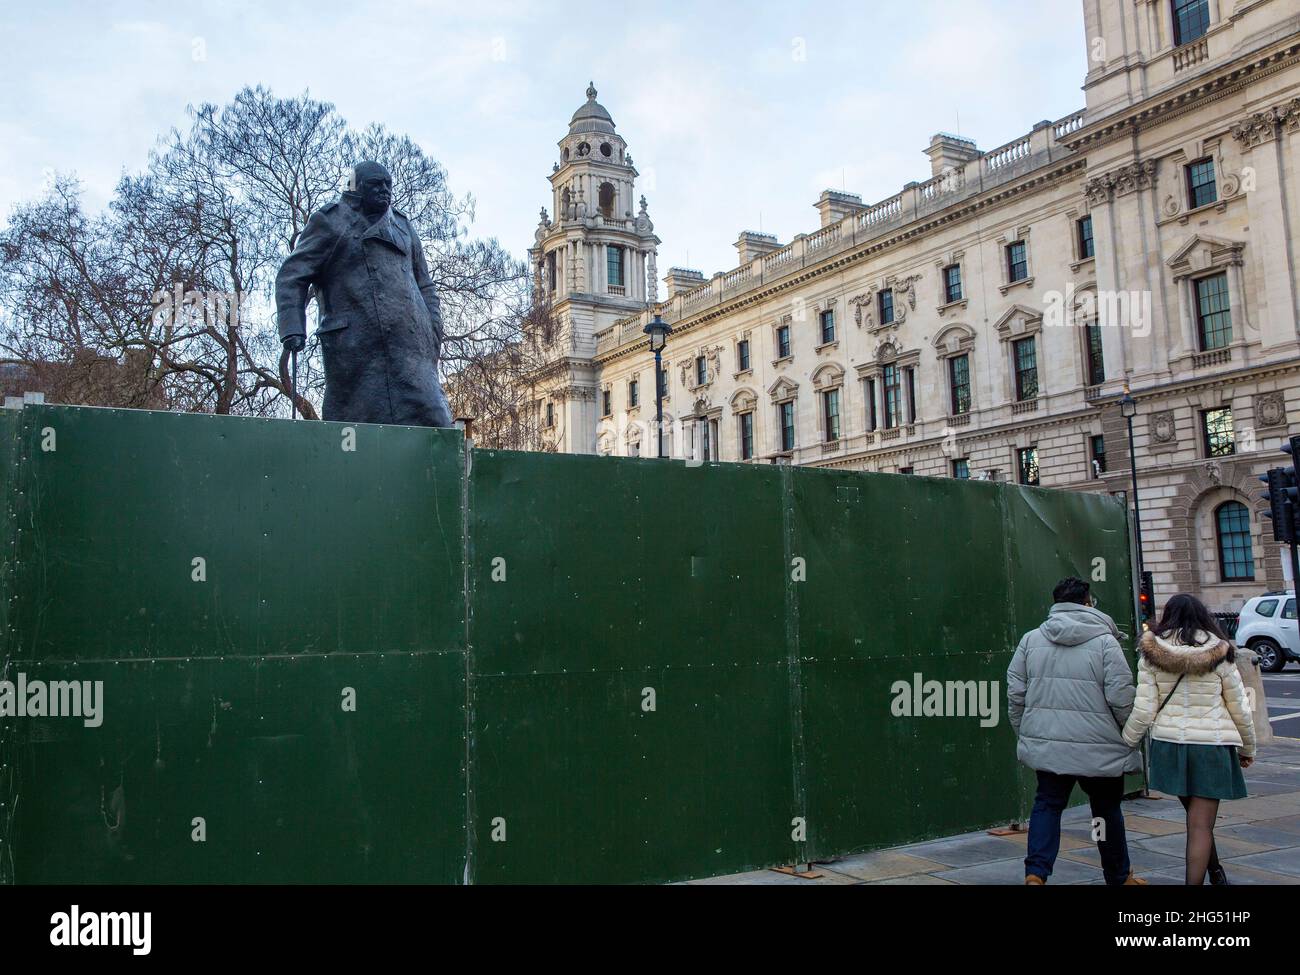 The statue of former Prime Minister Winston Churchill is seen boarded up in Parliament Square, London, on News Year's Eve. Stock Photo